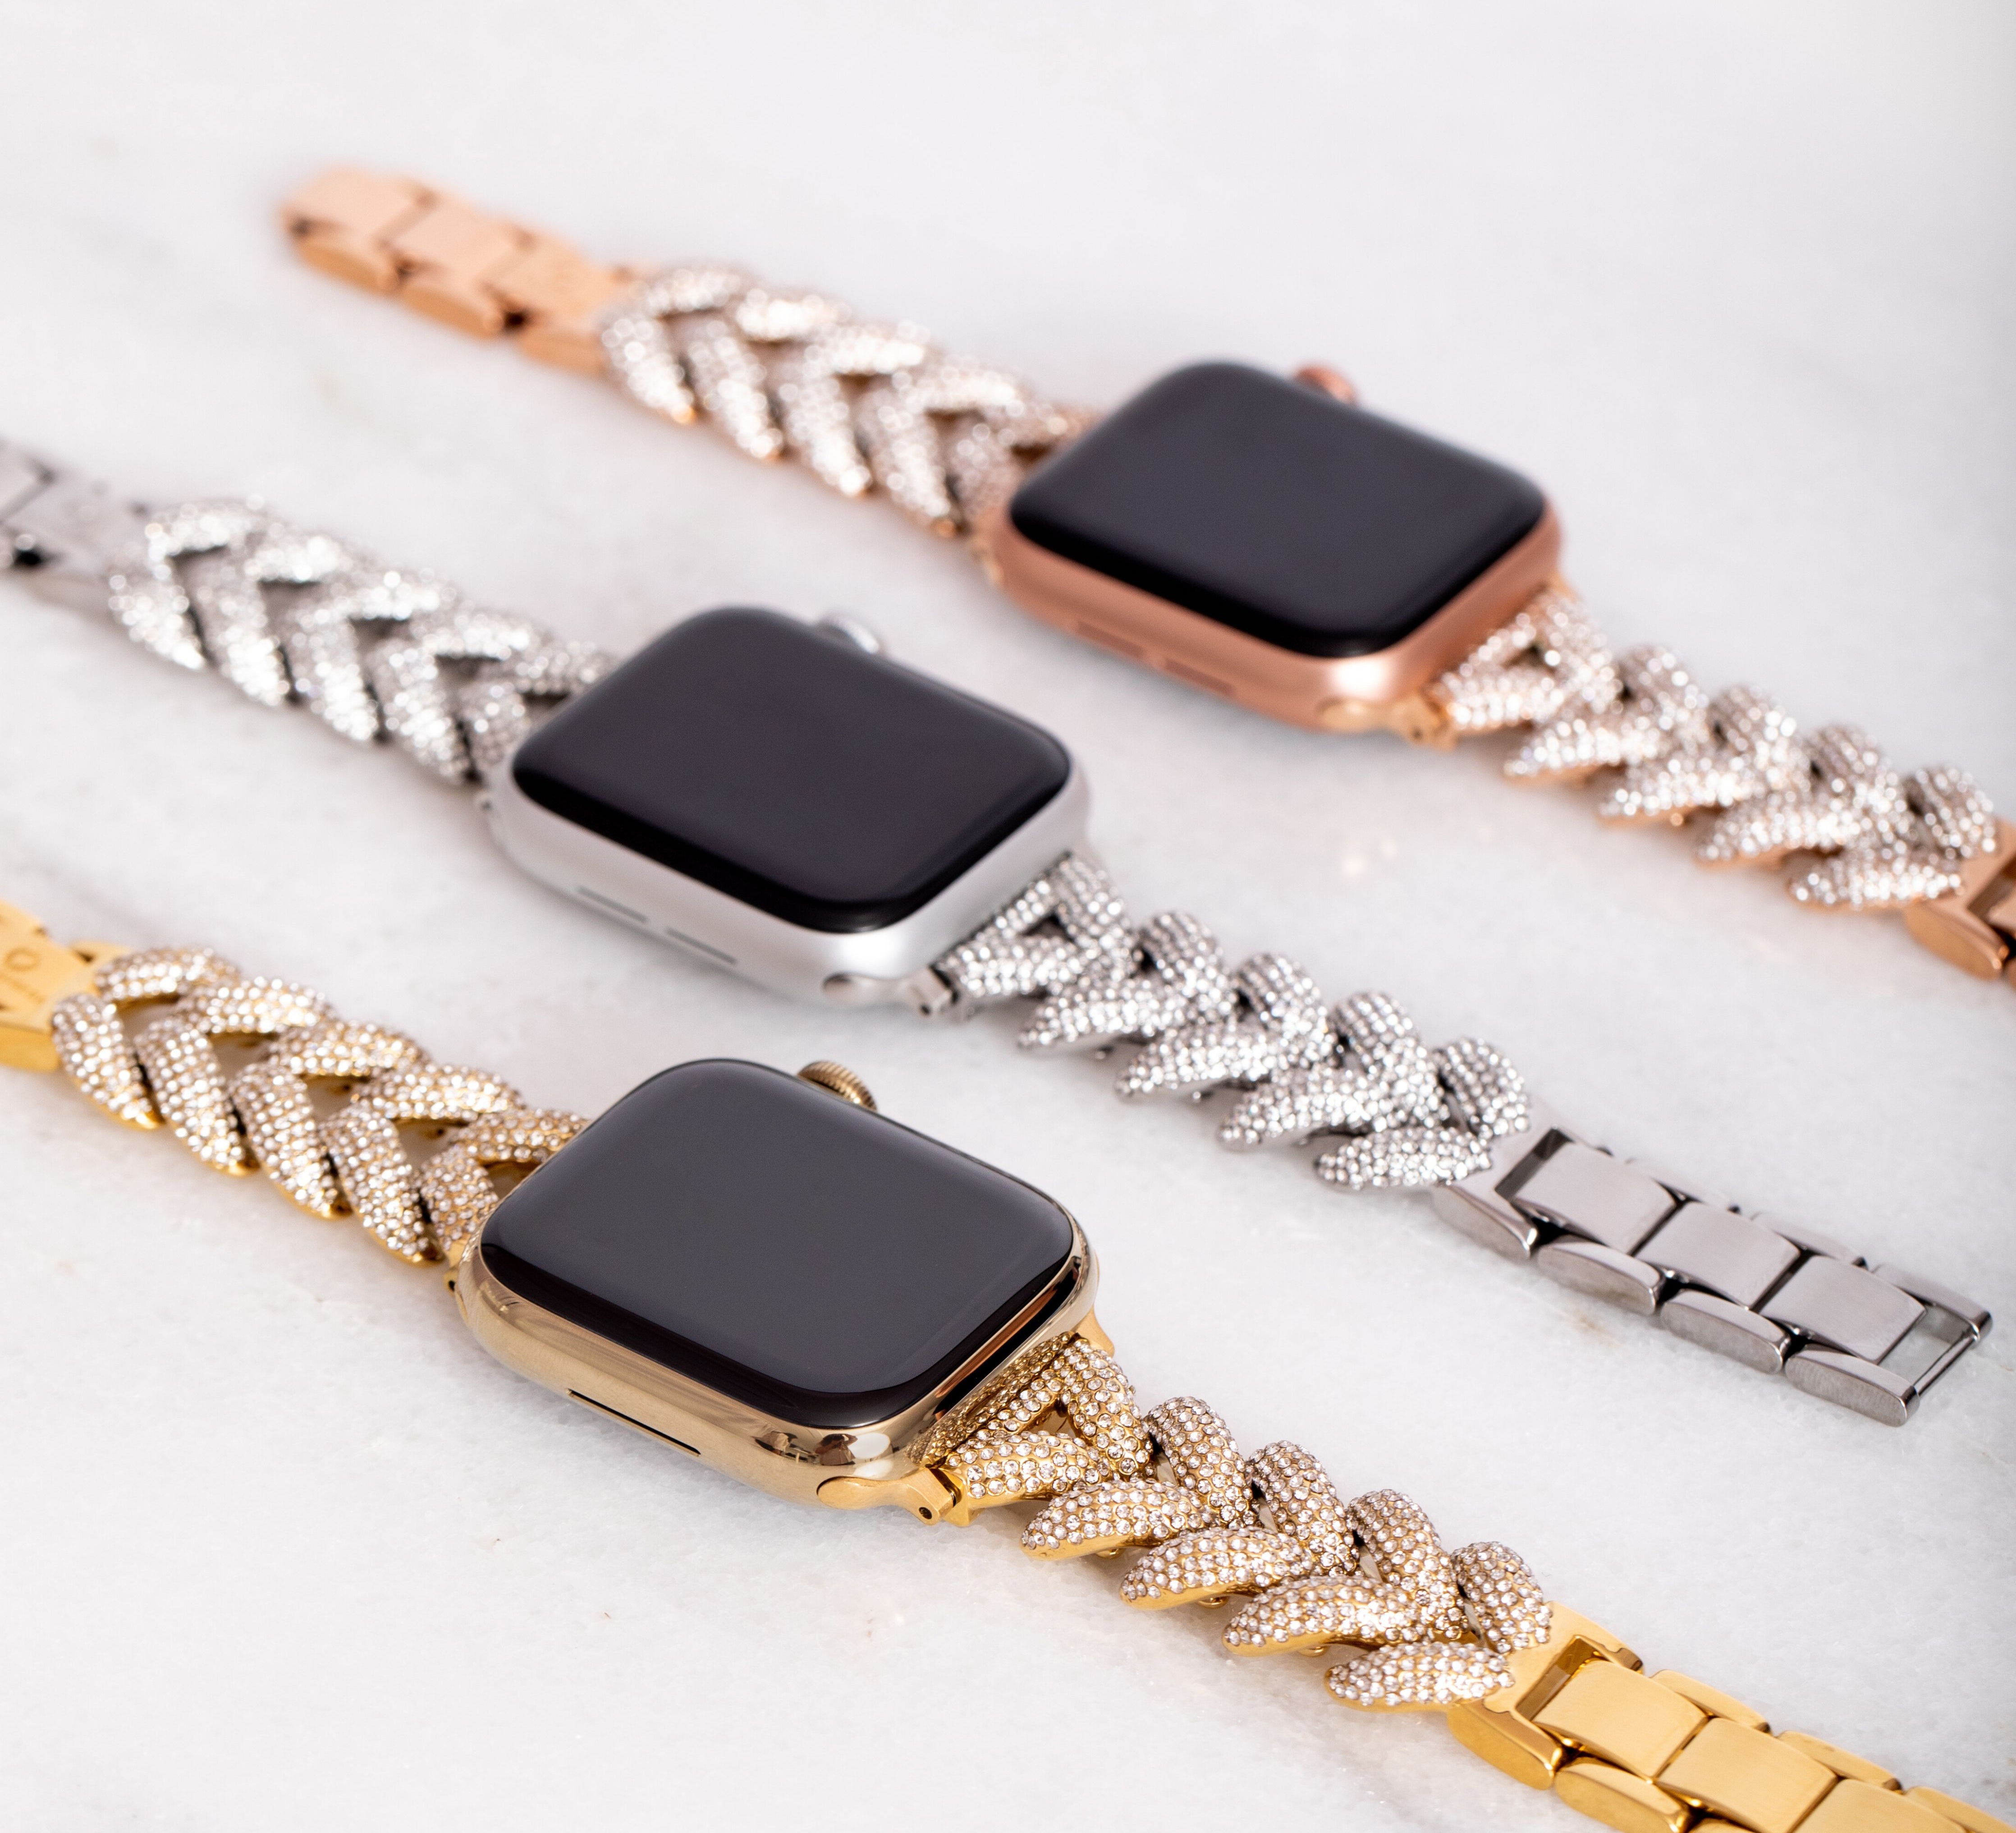 Crystal Pavé Herringbone Band for the Apple Watch - Goldenerre Women's Apple Watch Bands and Jewelry